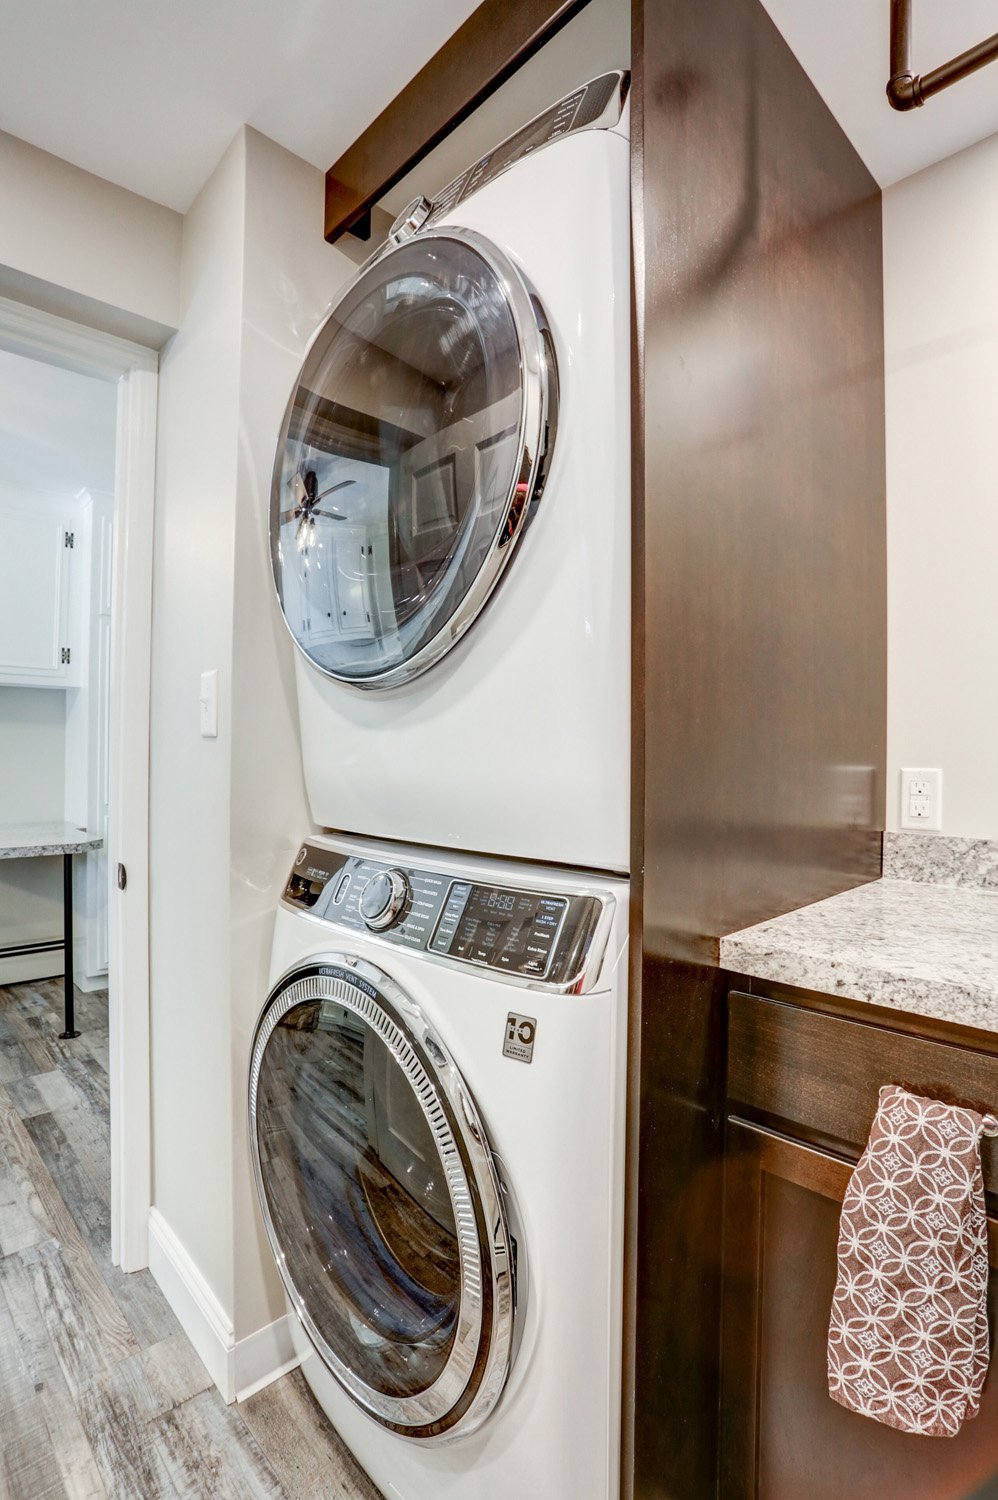 Lancaster Laundry Room Remodel with staked washer and dryer